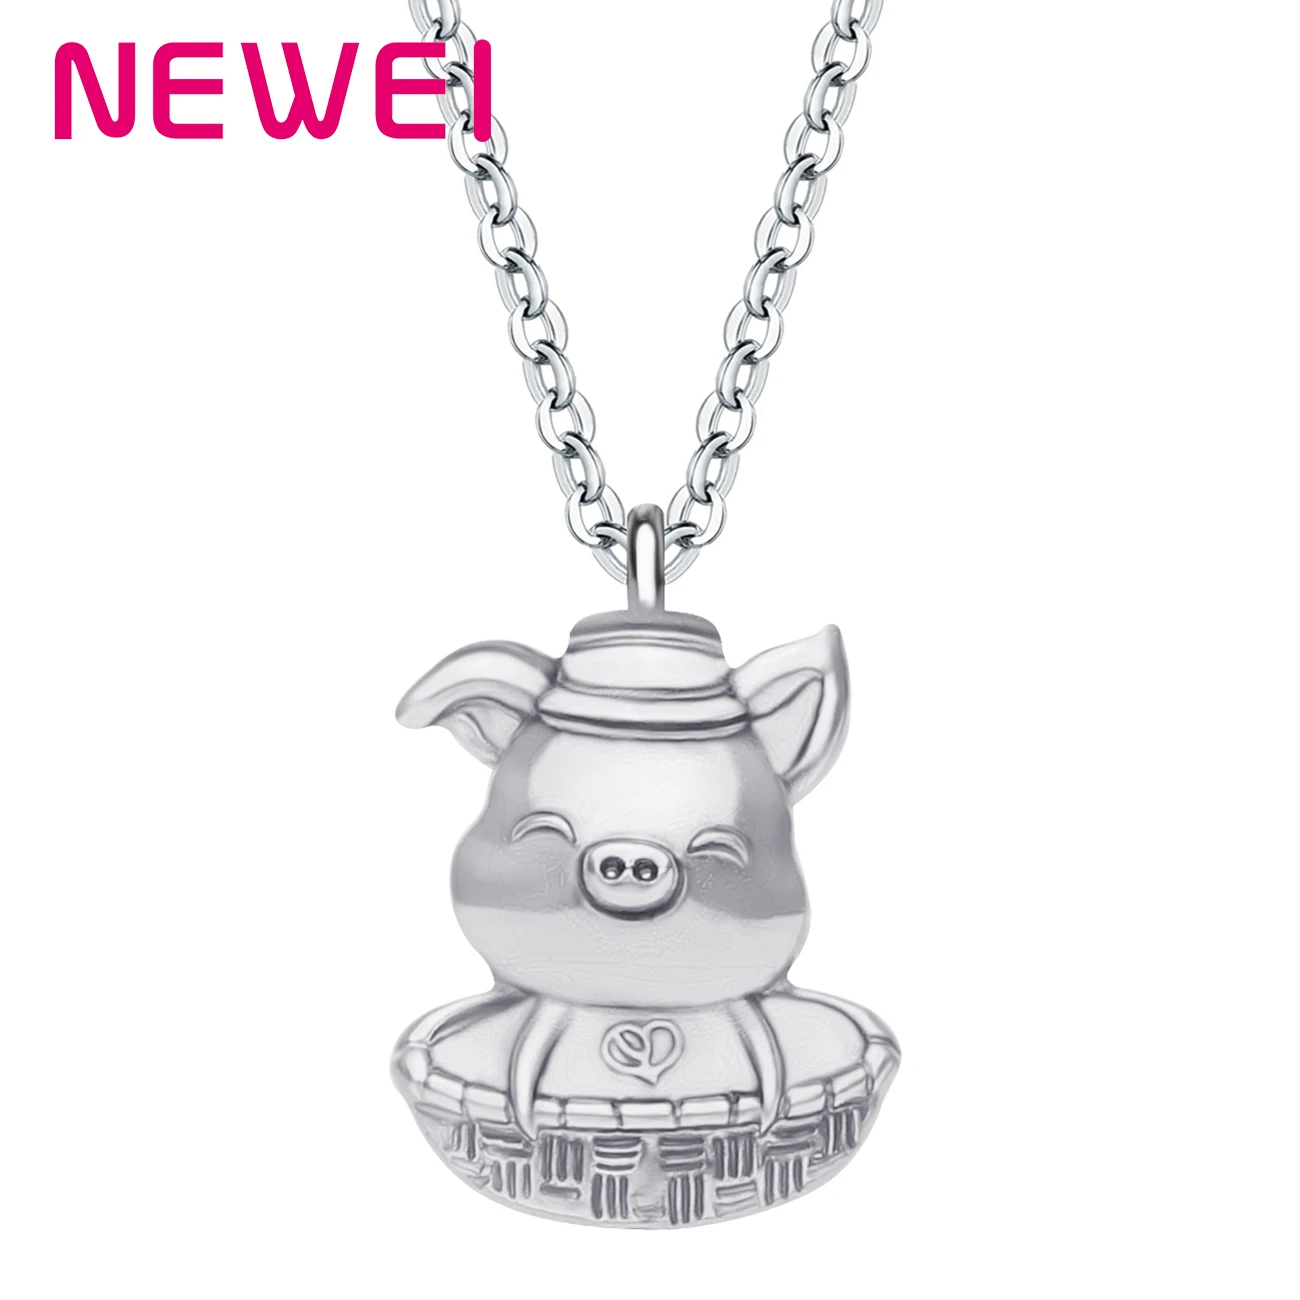 

Newei Alloy Plated Antique Gold Lucky Pig Piggy Necklace Pendant Animal Cartoon Chain Jewelry For Kids Friends Gift Decoration